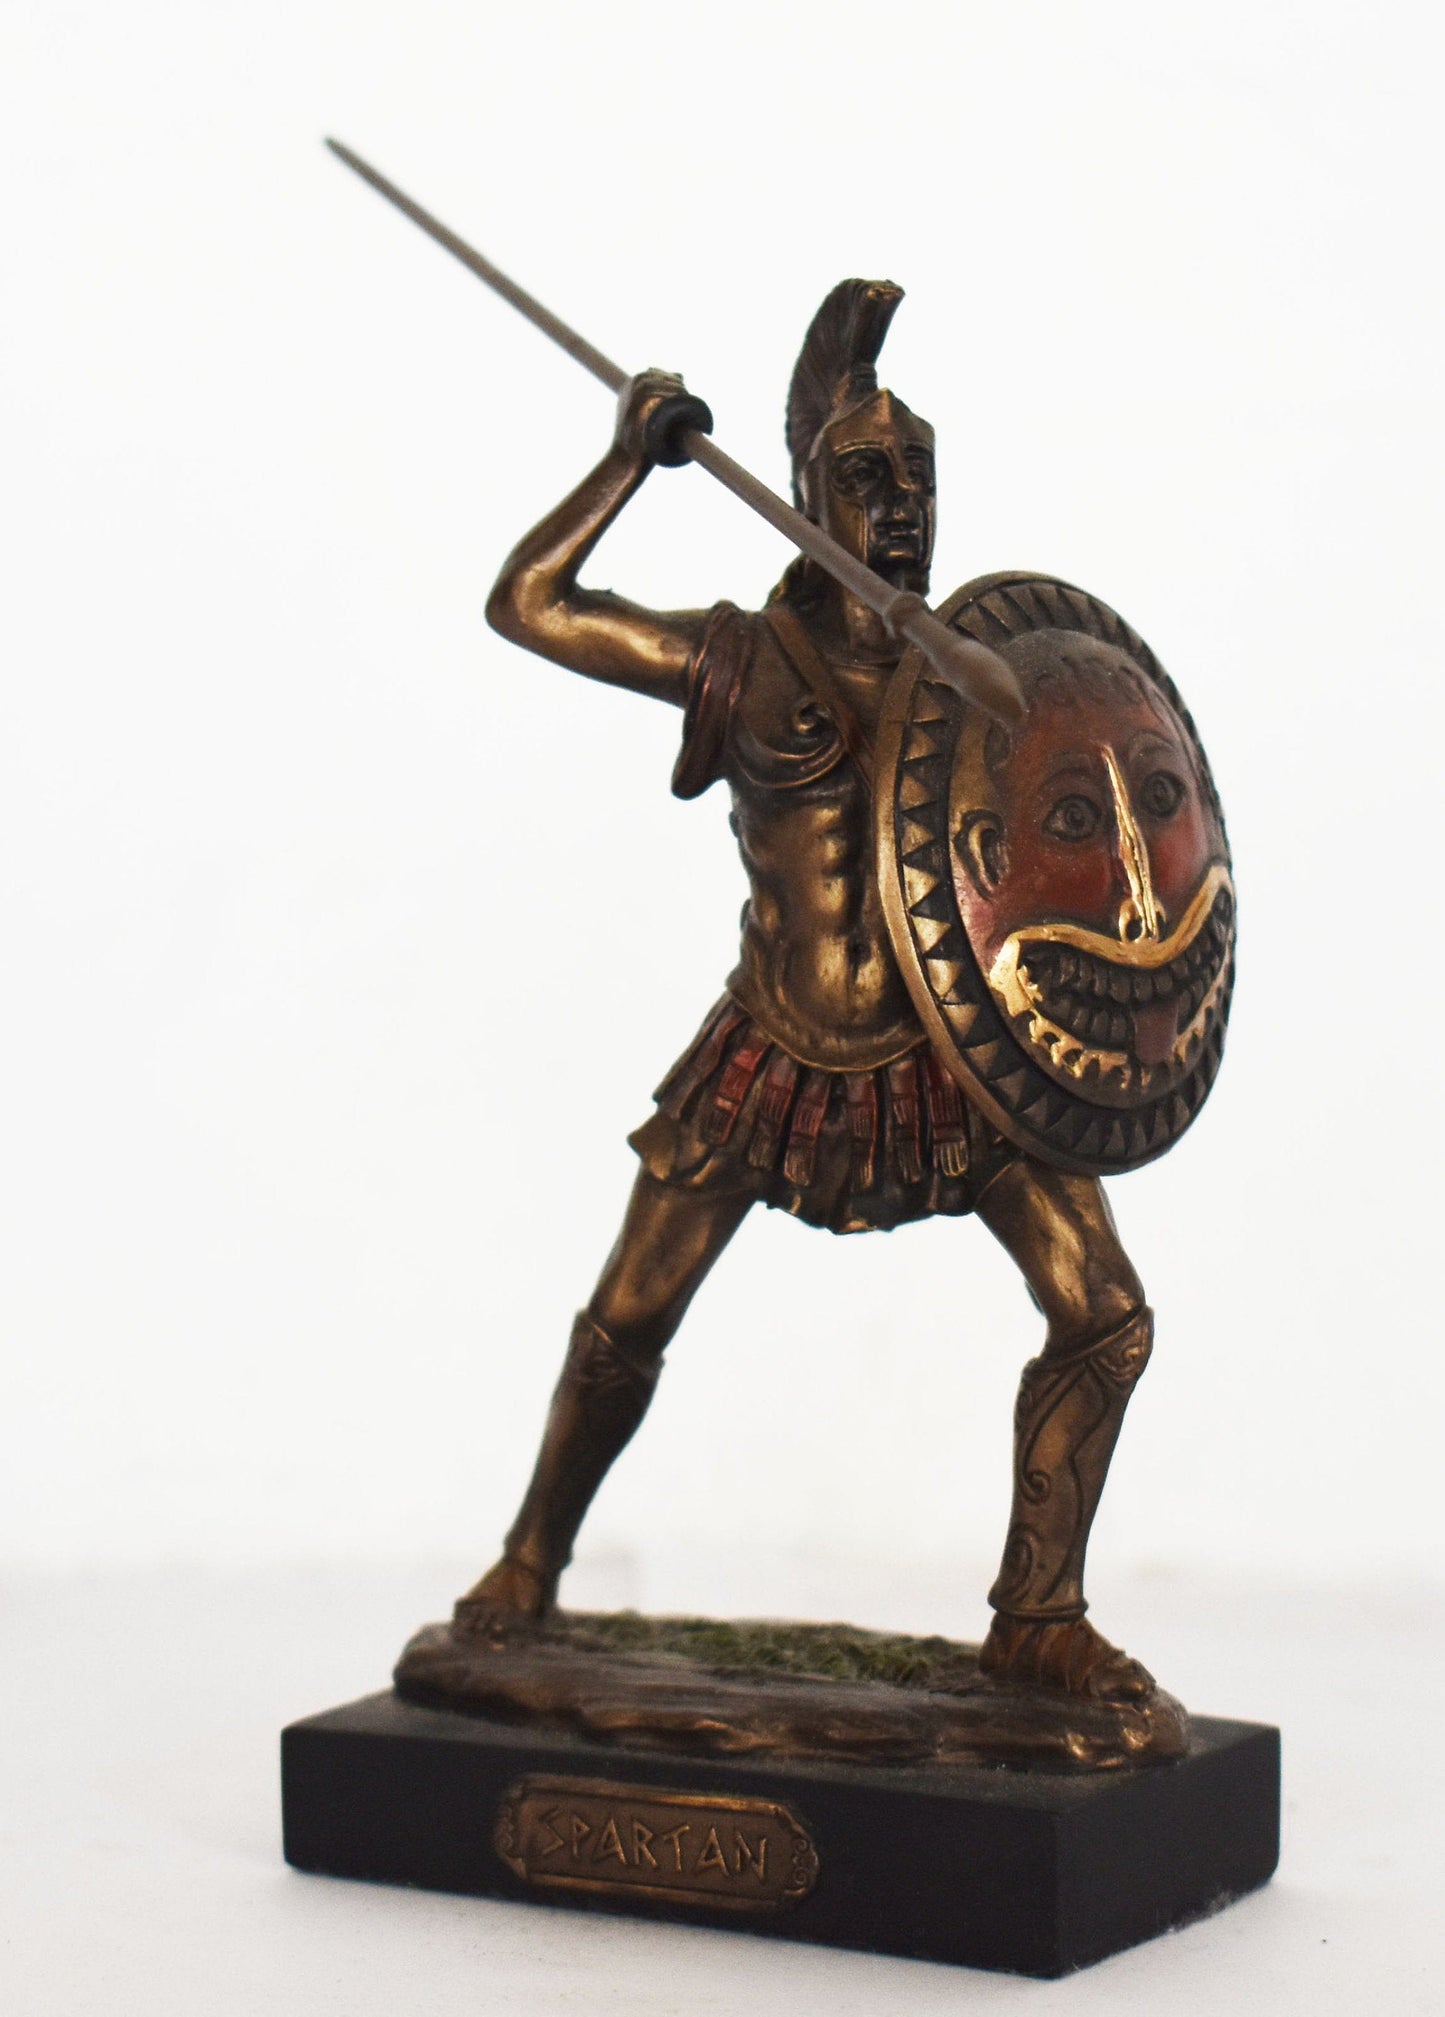 Spartan Hoplite Mini - King Leonidas and 300 - Battle of Thermopylae - 480 BC - Cold Cast Bronze Resin